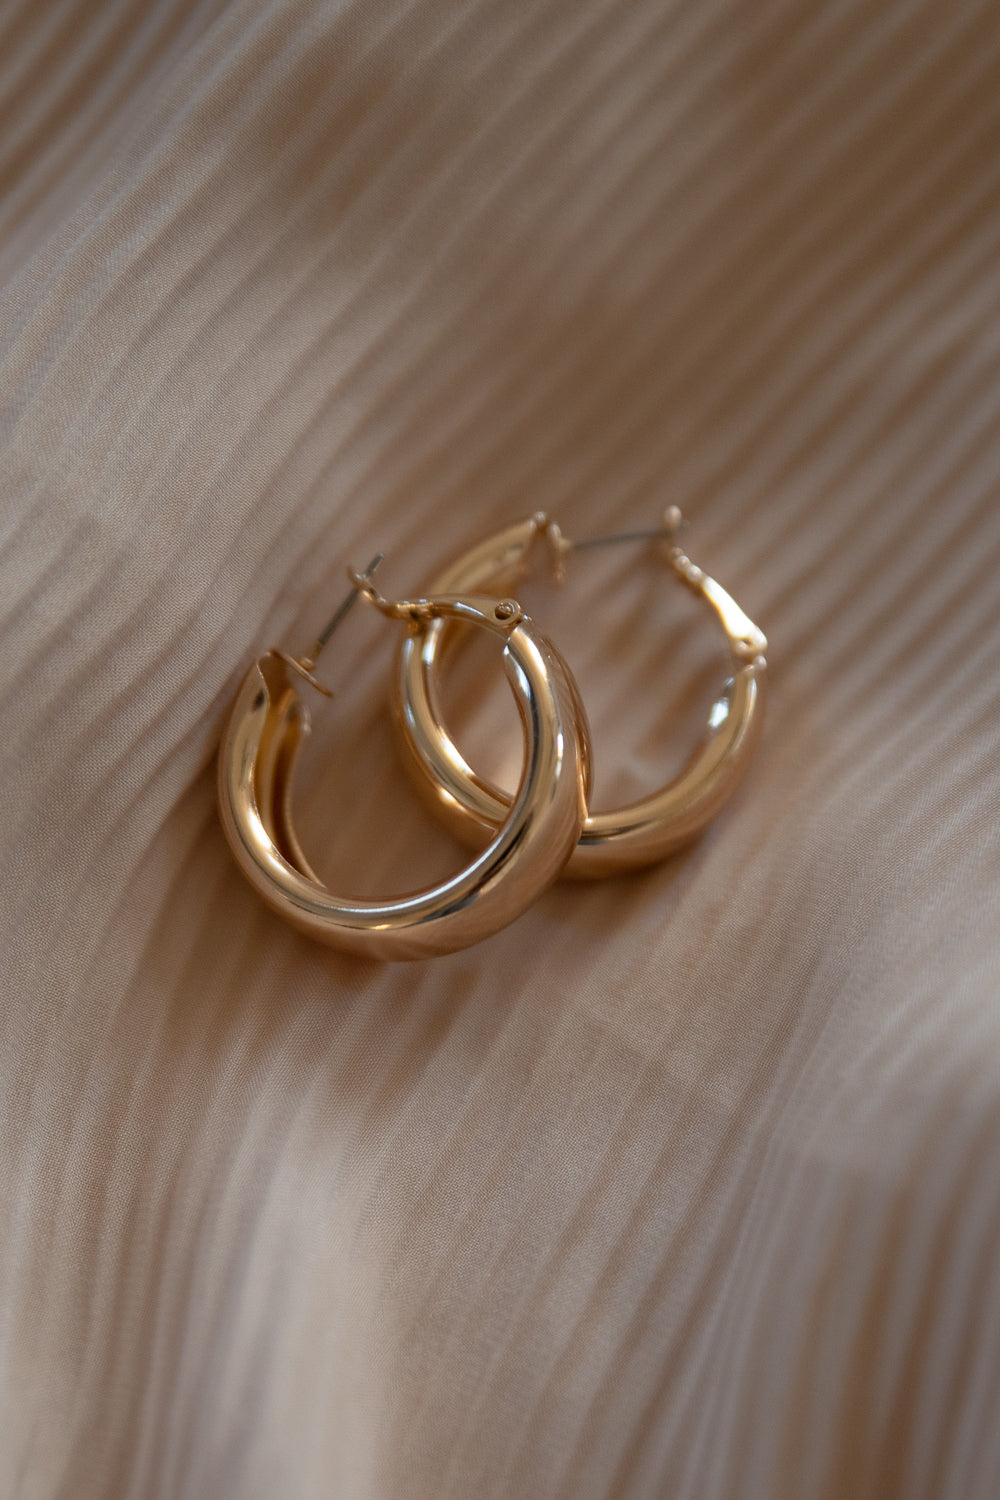 1" Drop - Thick Gold Hoops